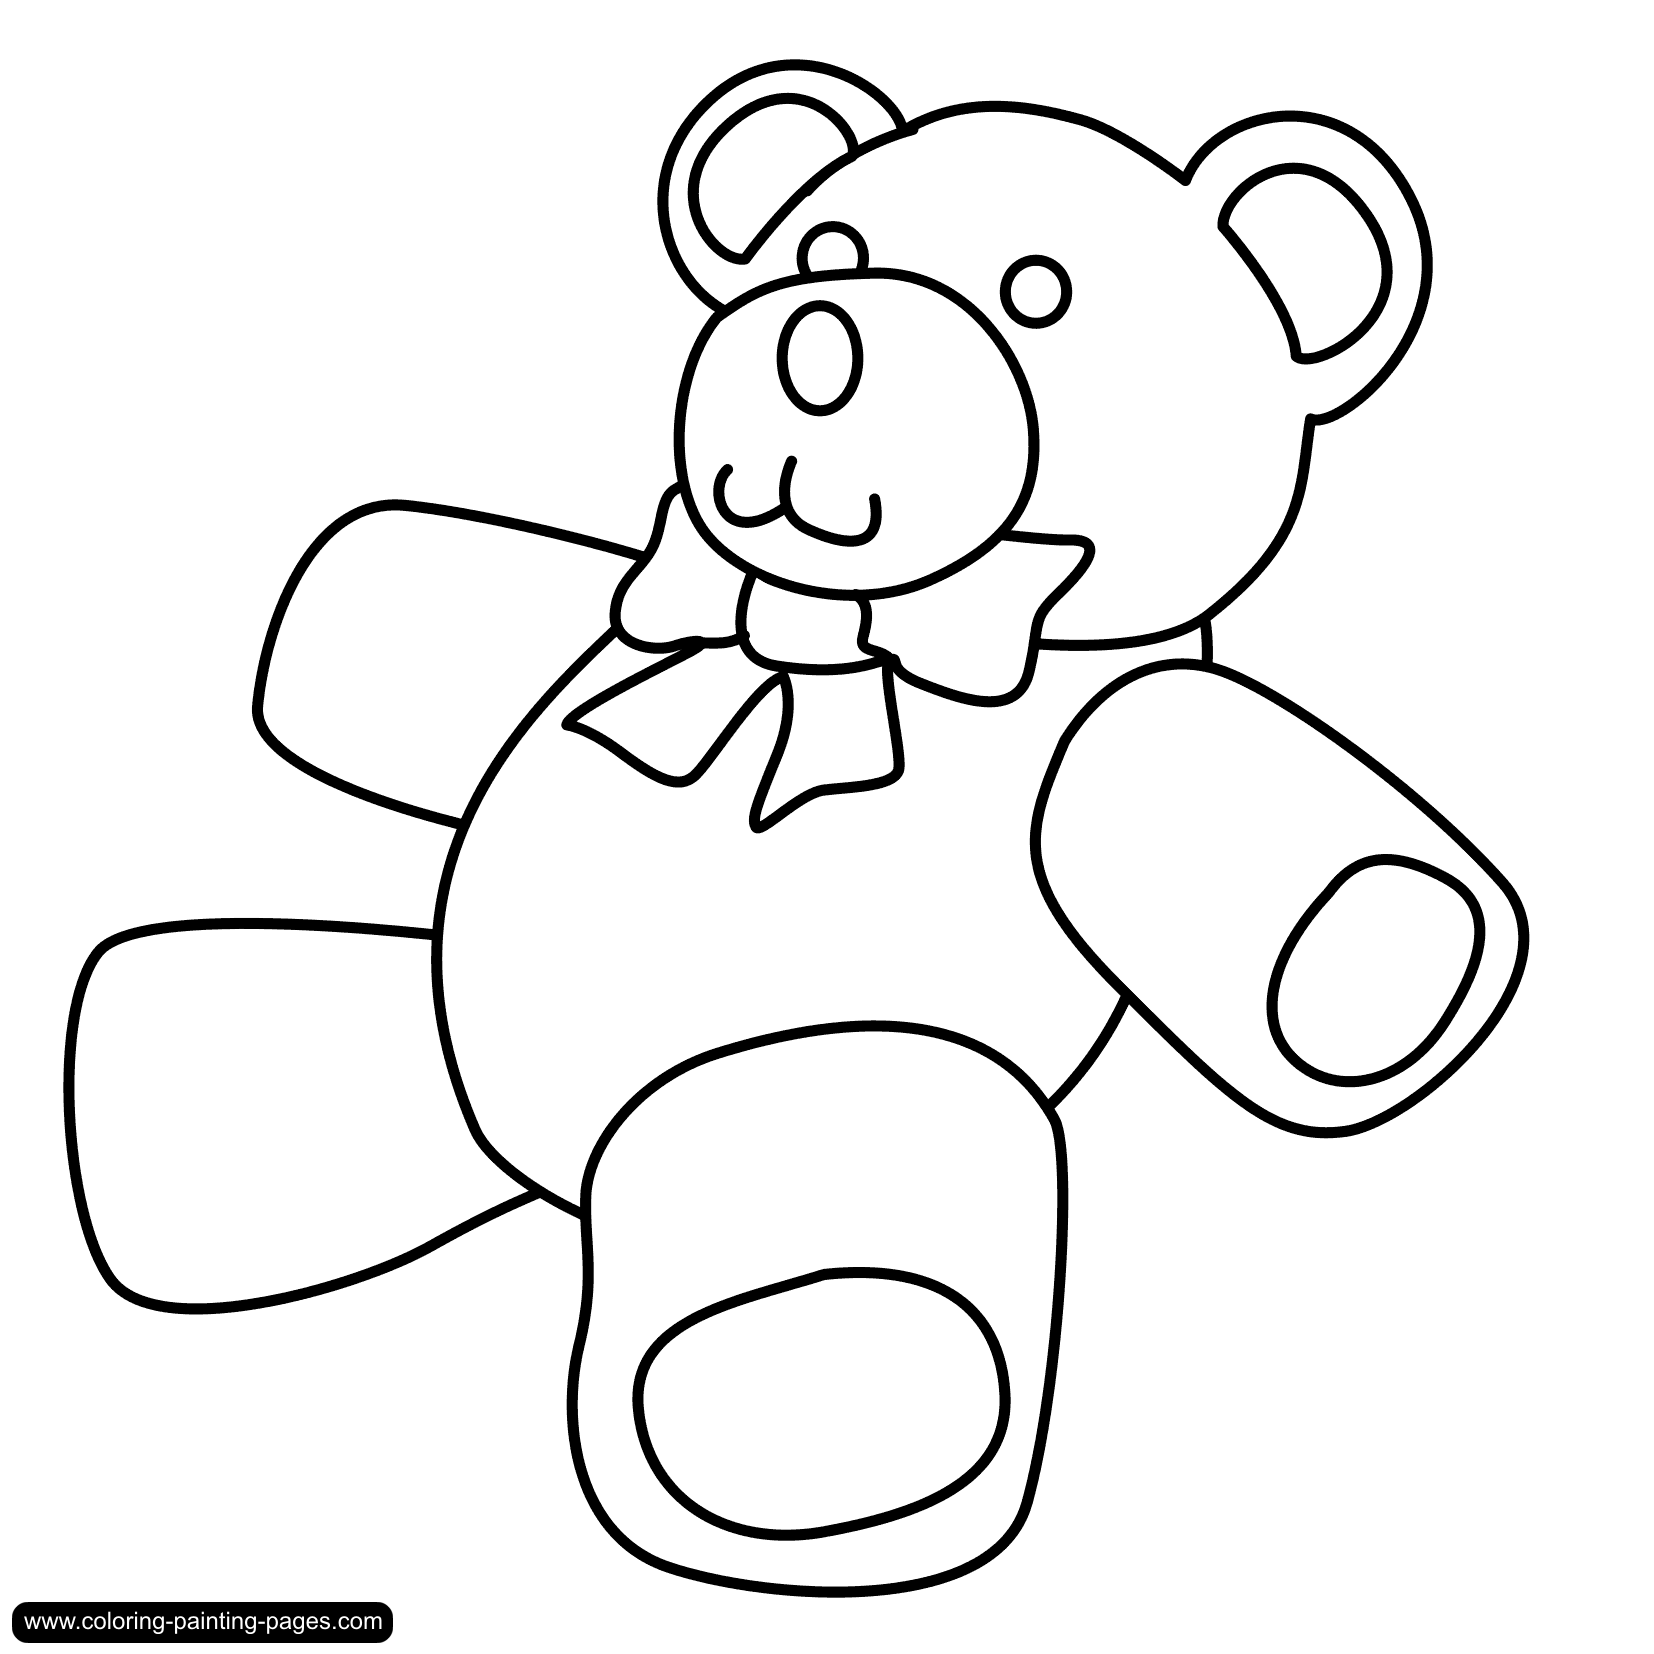 Teddy Bear In Black And White - ClipArt Best